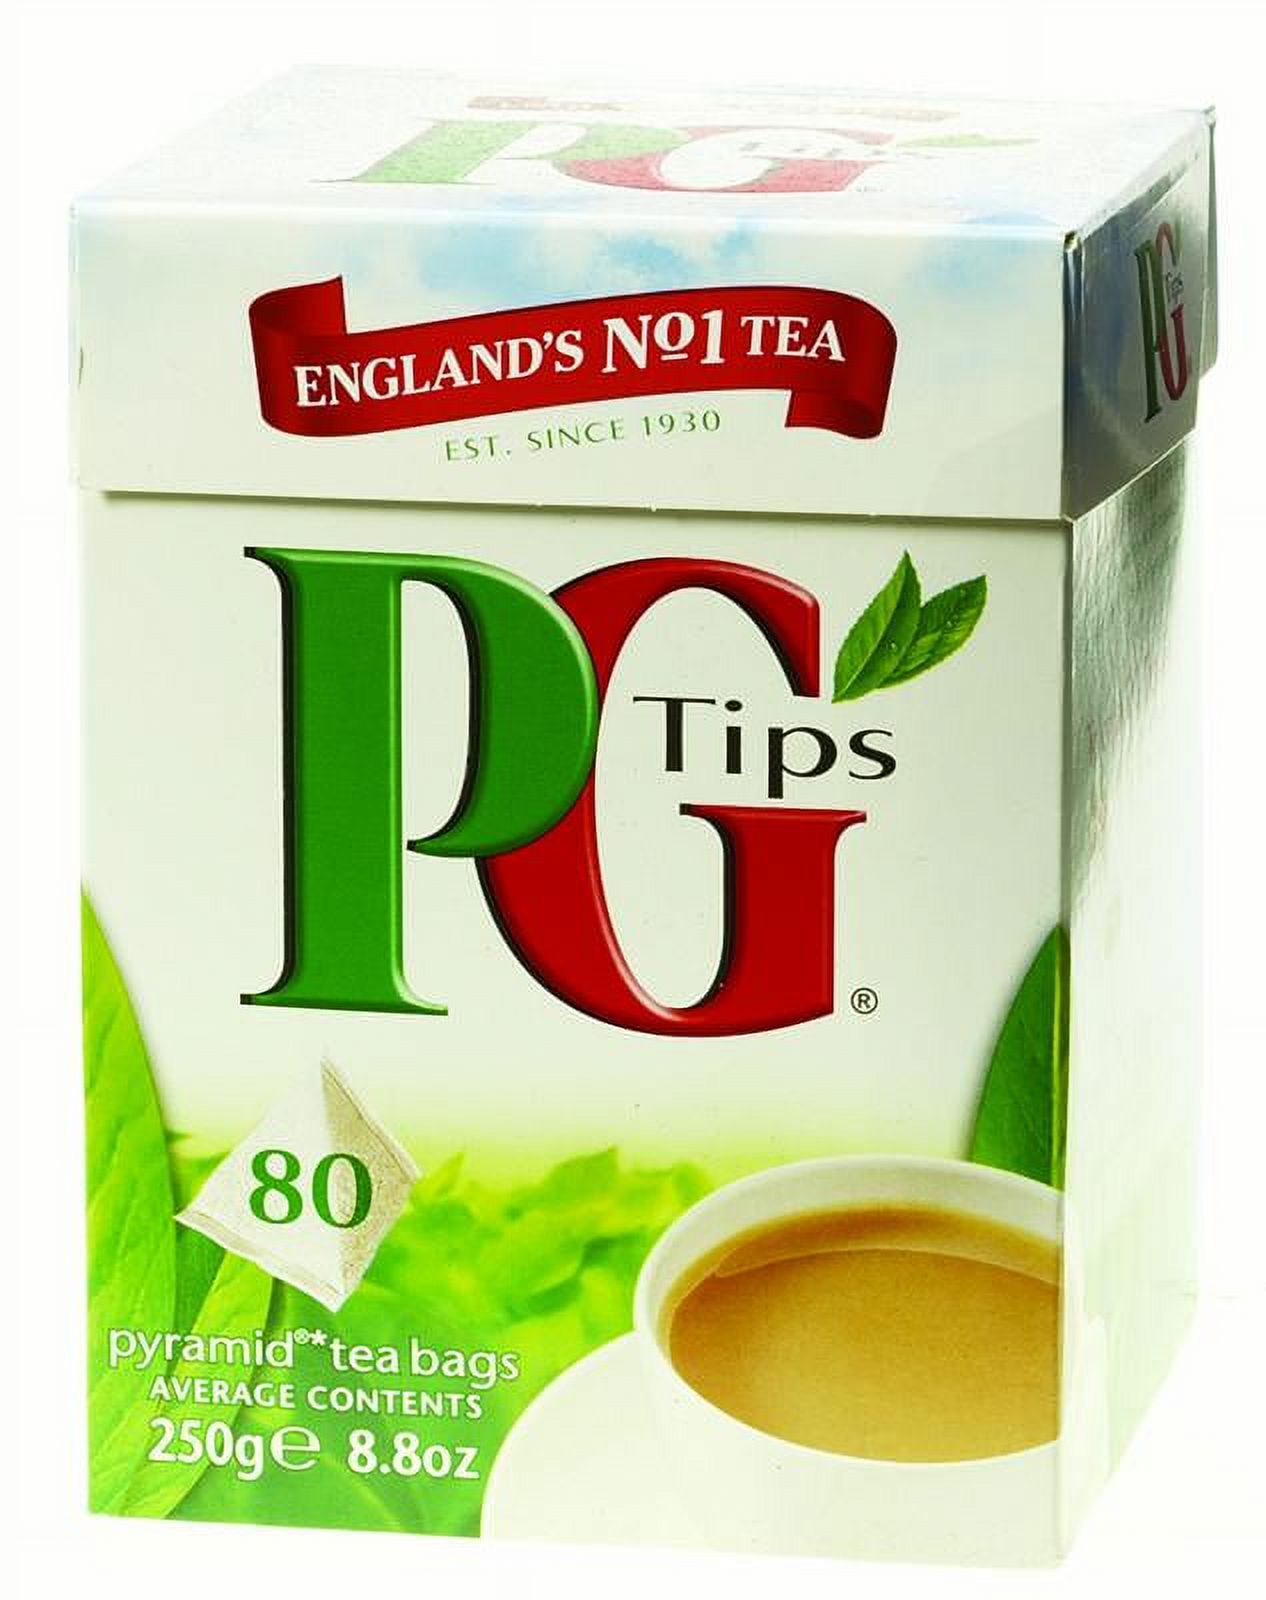 P G Tips Pyramid Teabags, 80ct, 8.18oz (232g) - image 1 of 2